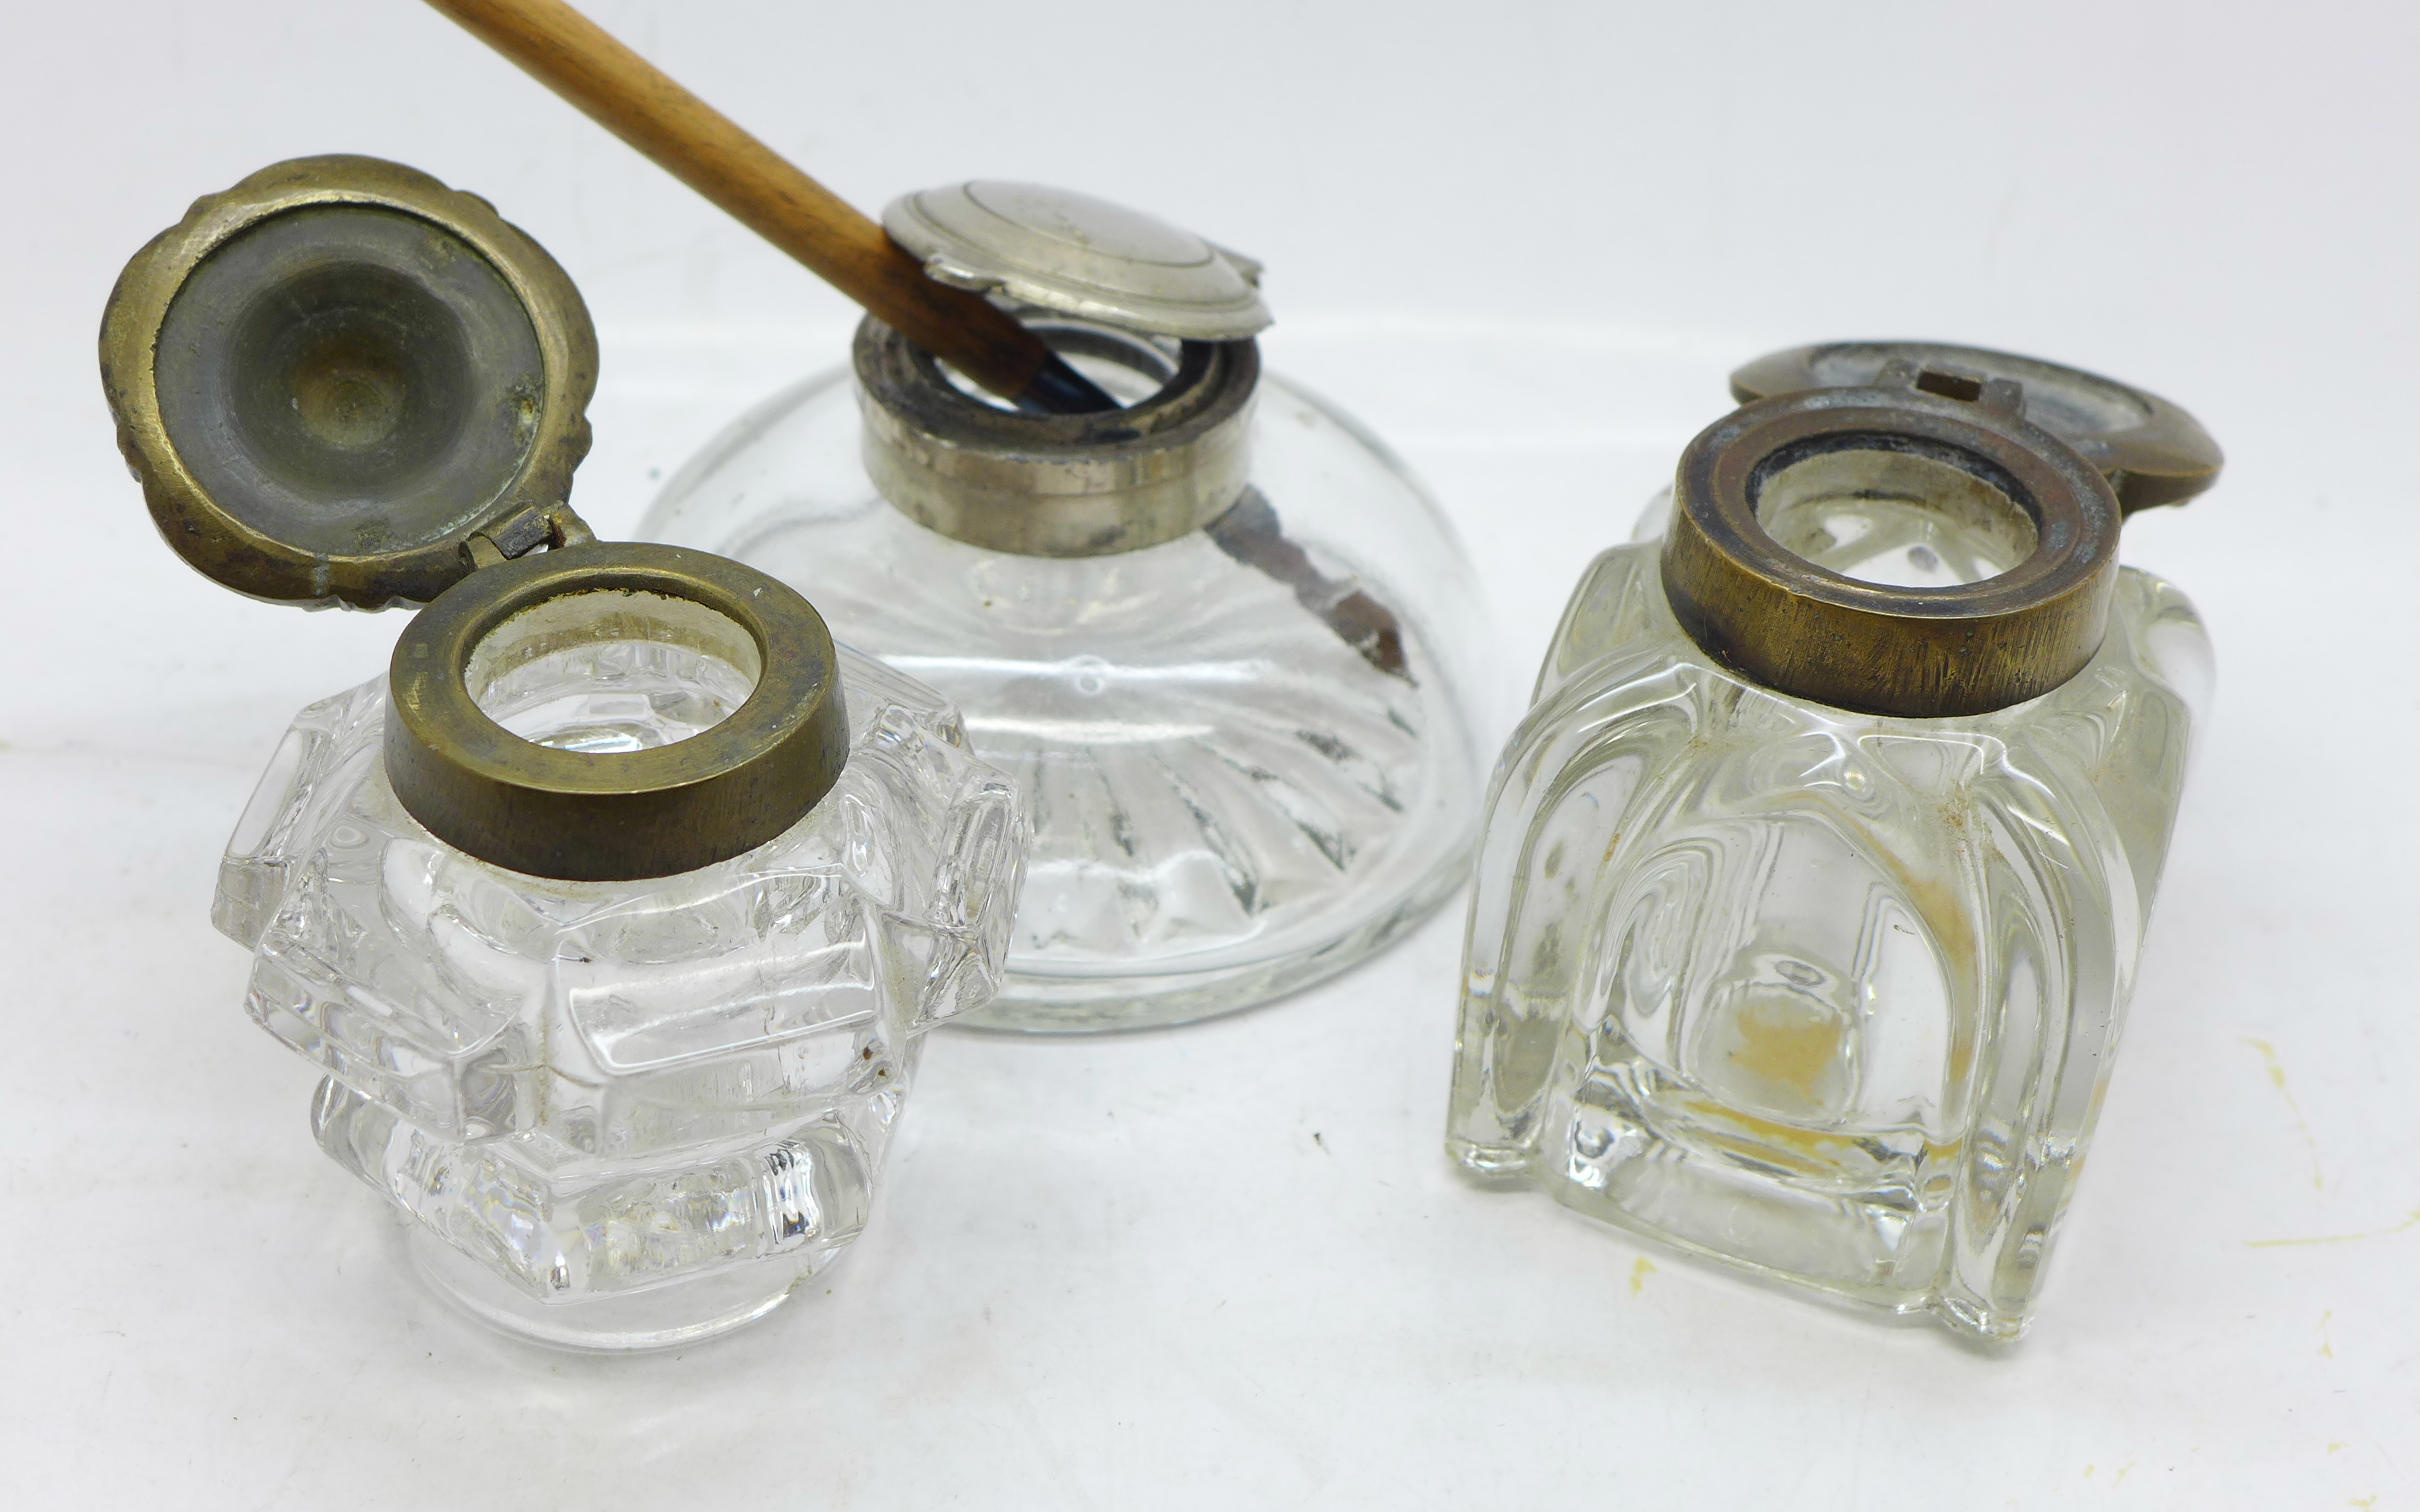 Three Edwardian glass inkwells and a dip pen - Image 5 of 6